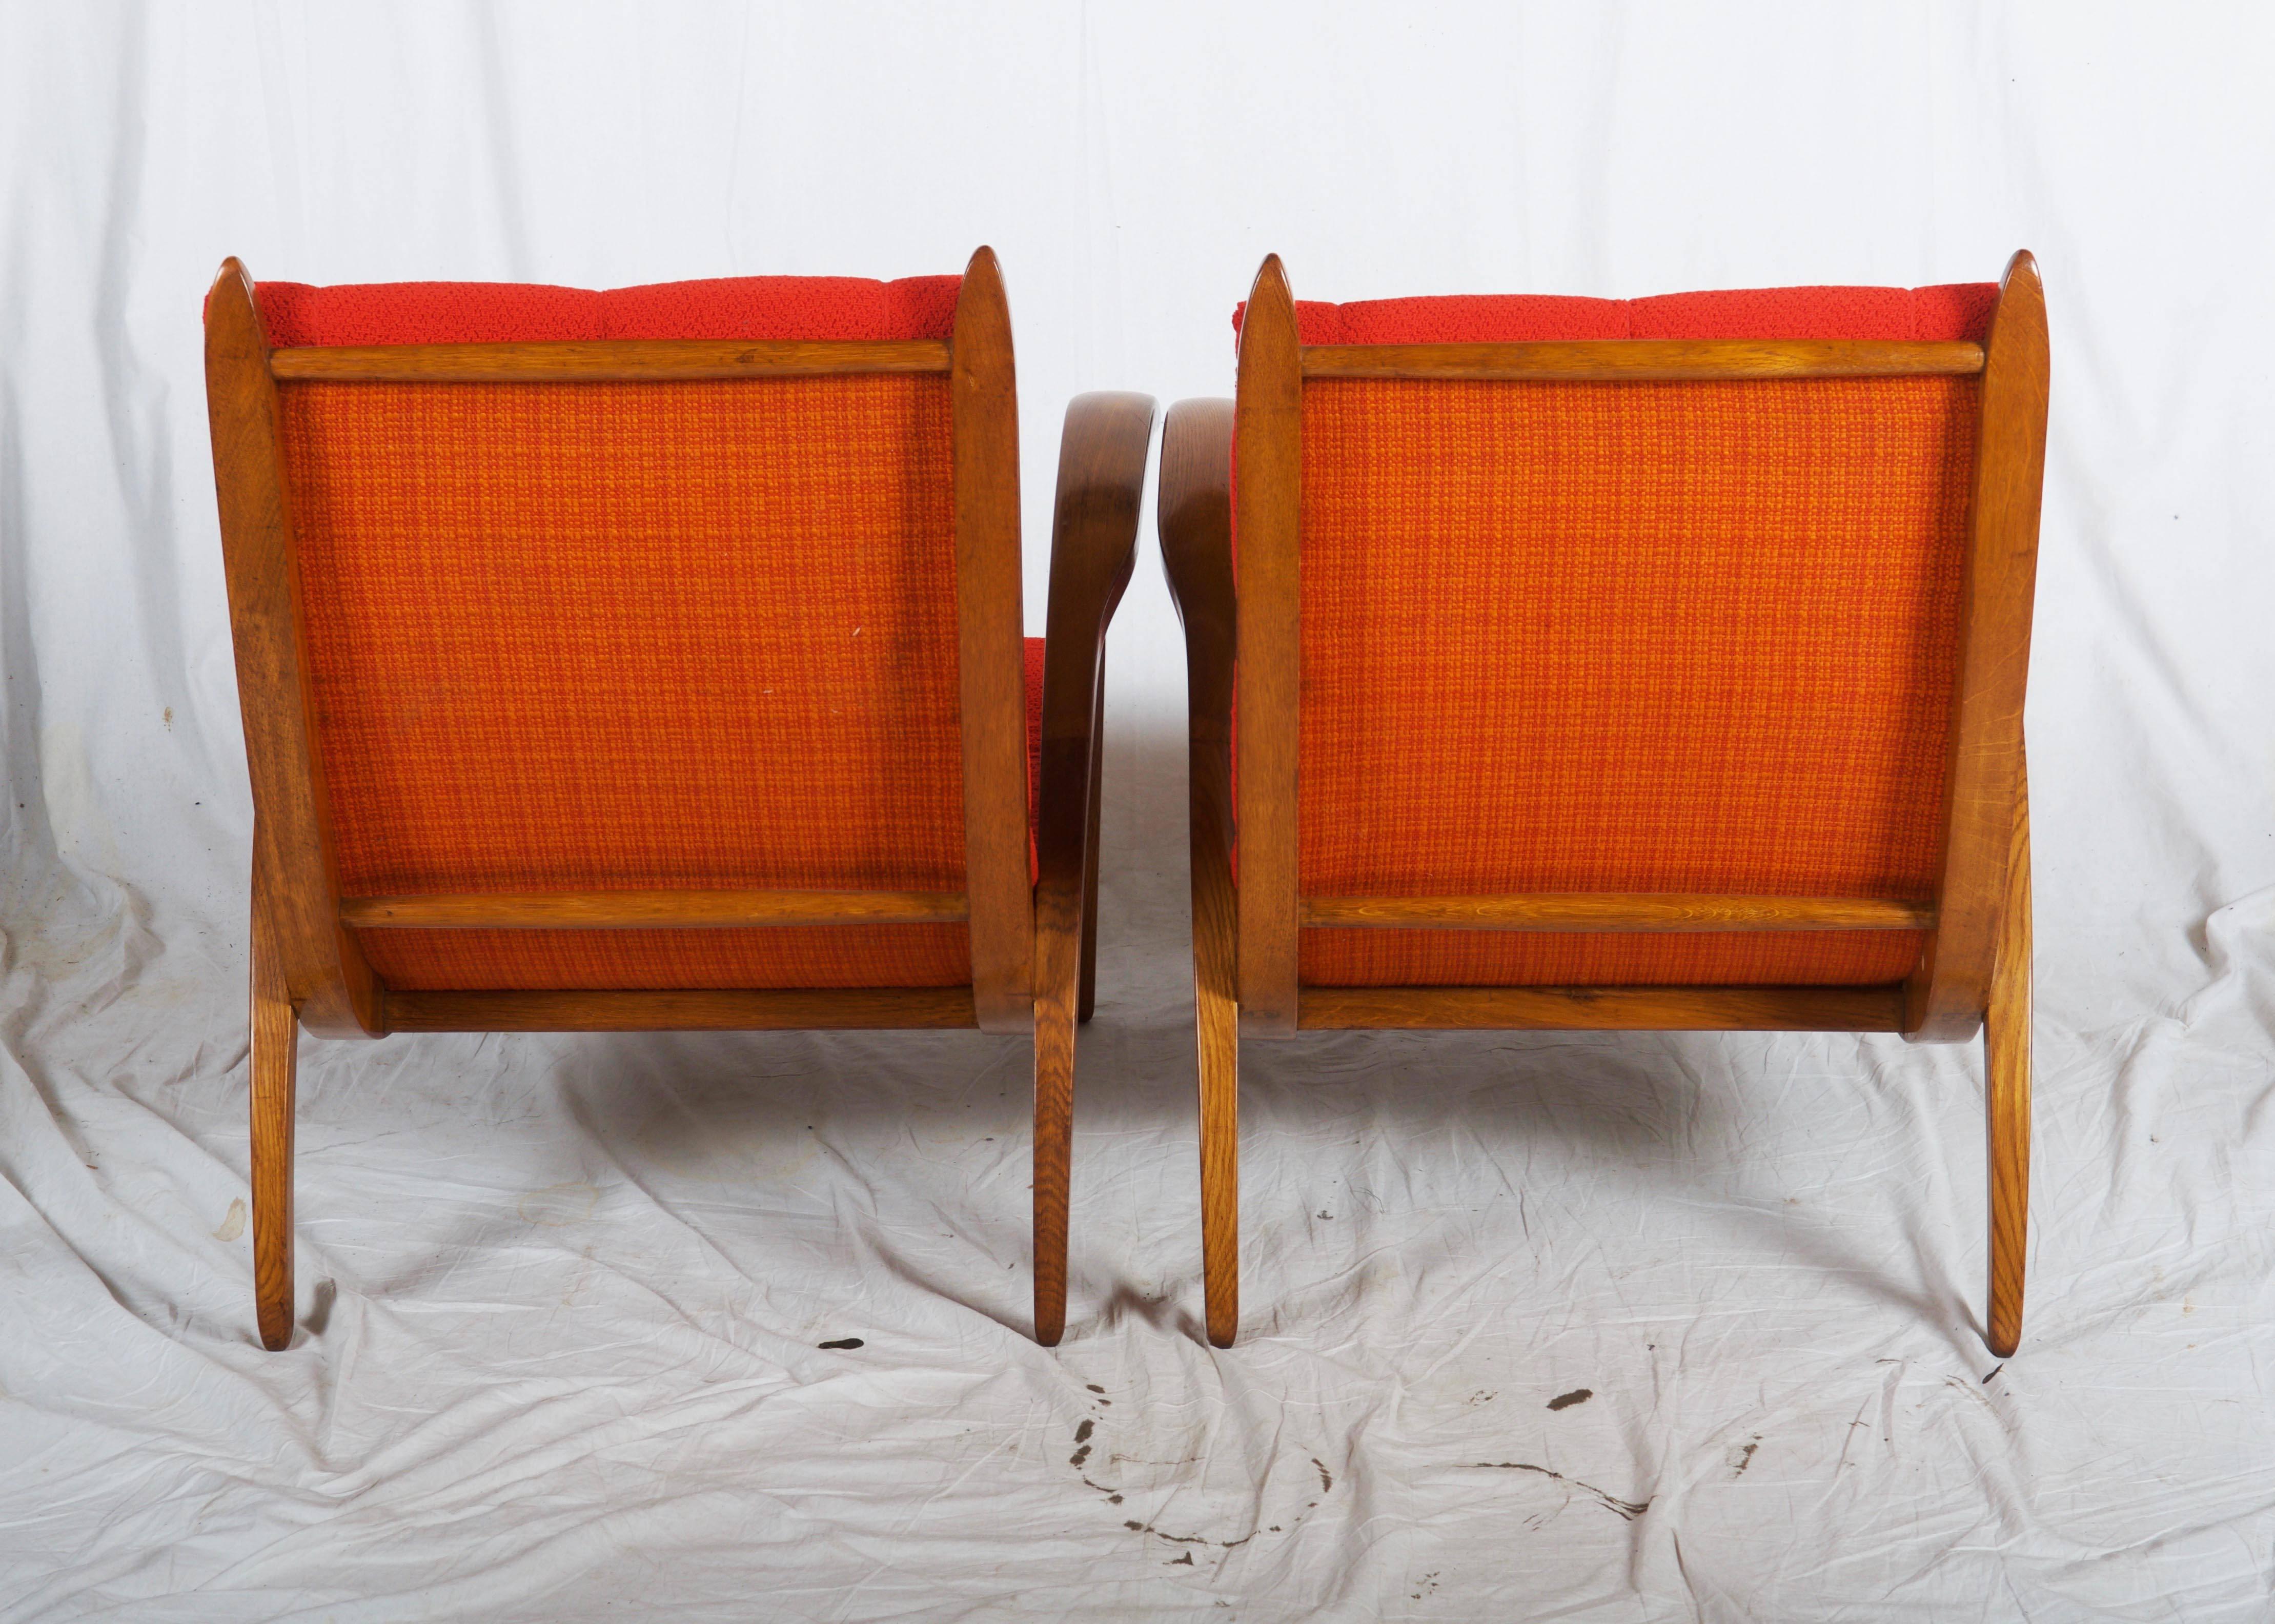 Upholstery Very Rare Pair of Mid-Century Armchairs Attributed to Up-Zavody Brno For Sale